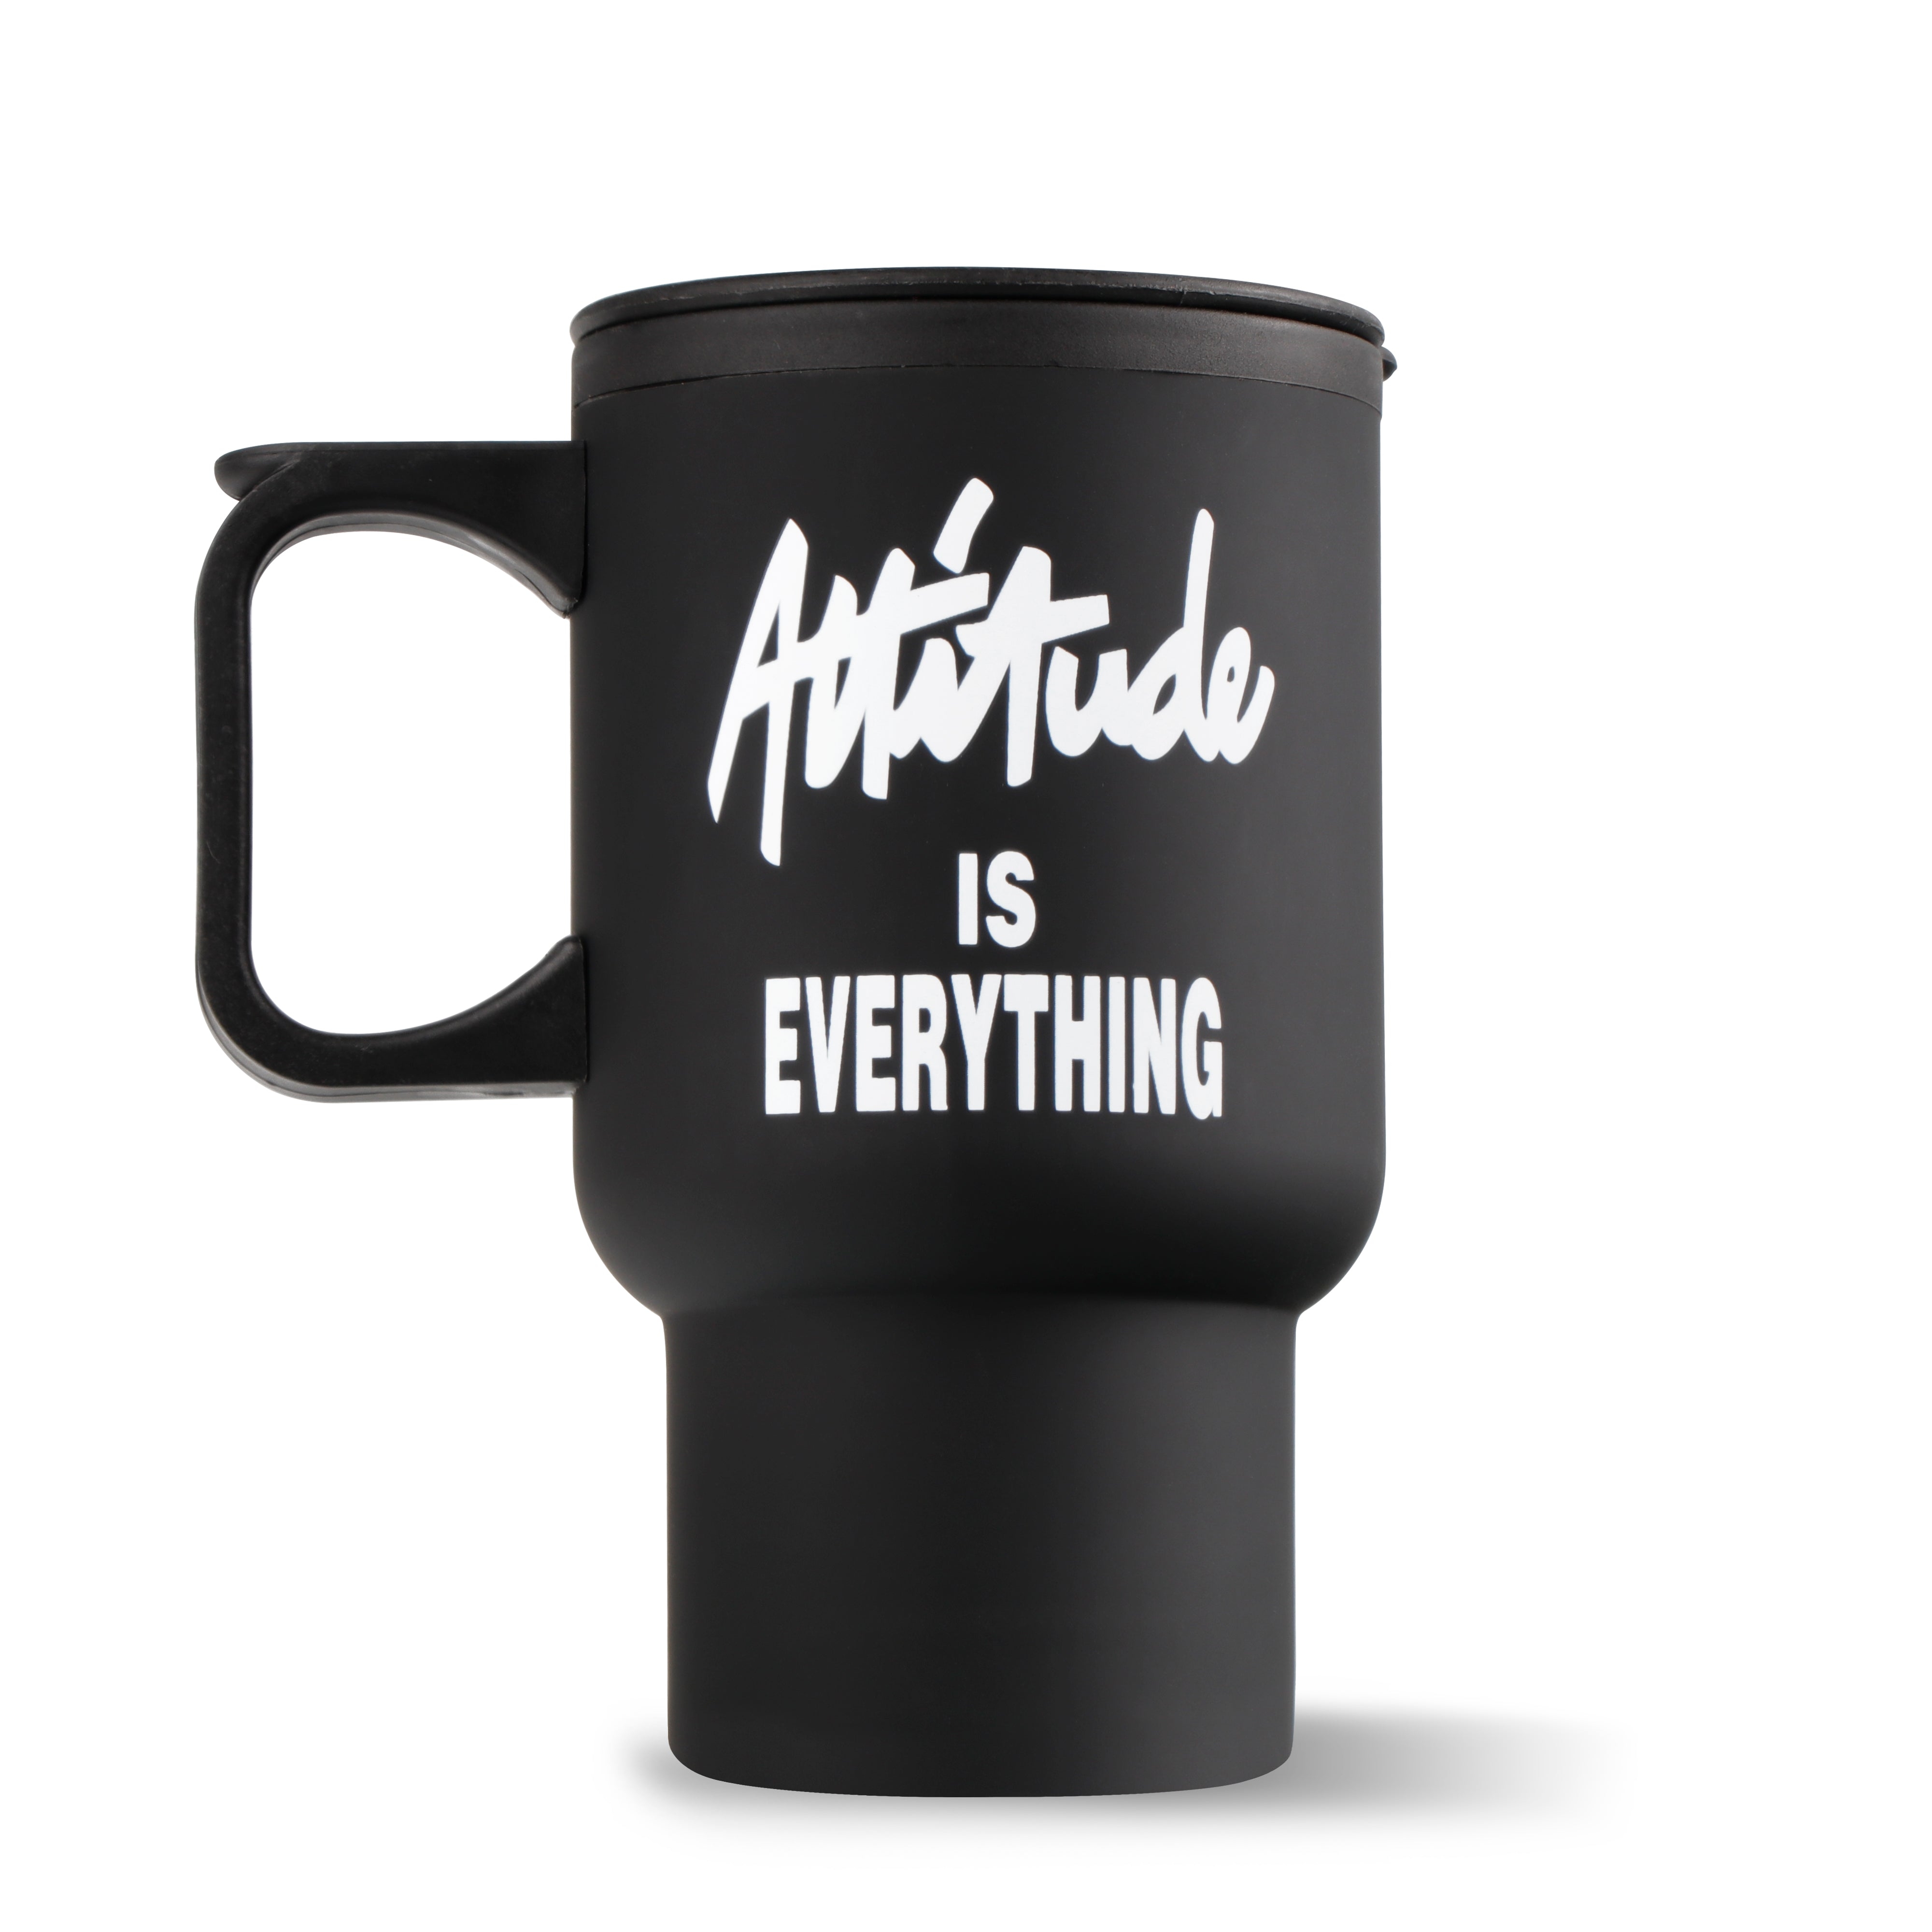 Archies | Archies Printed Hard PrasticTravel Sipper with handle /Shaker Corporate Quote Theme - Gifts for Him/Her, Gifts for Husband/Wife, Men, Women, Gifts for Friends/Colleagues, Cute,